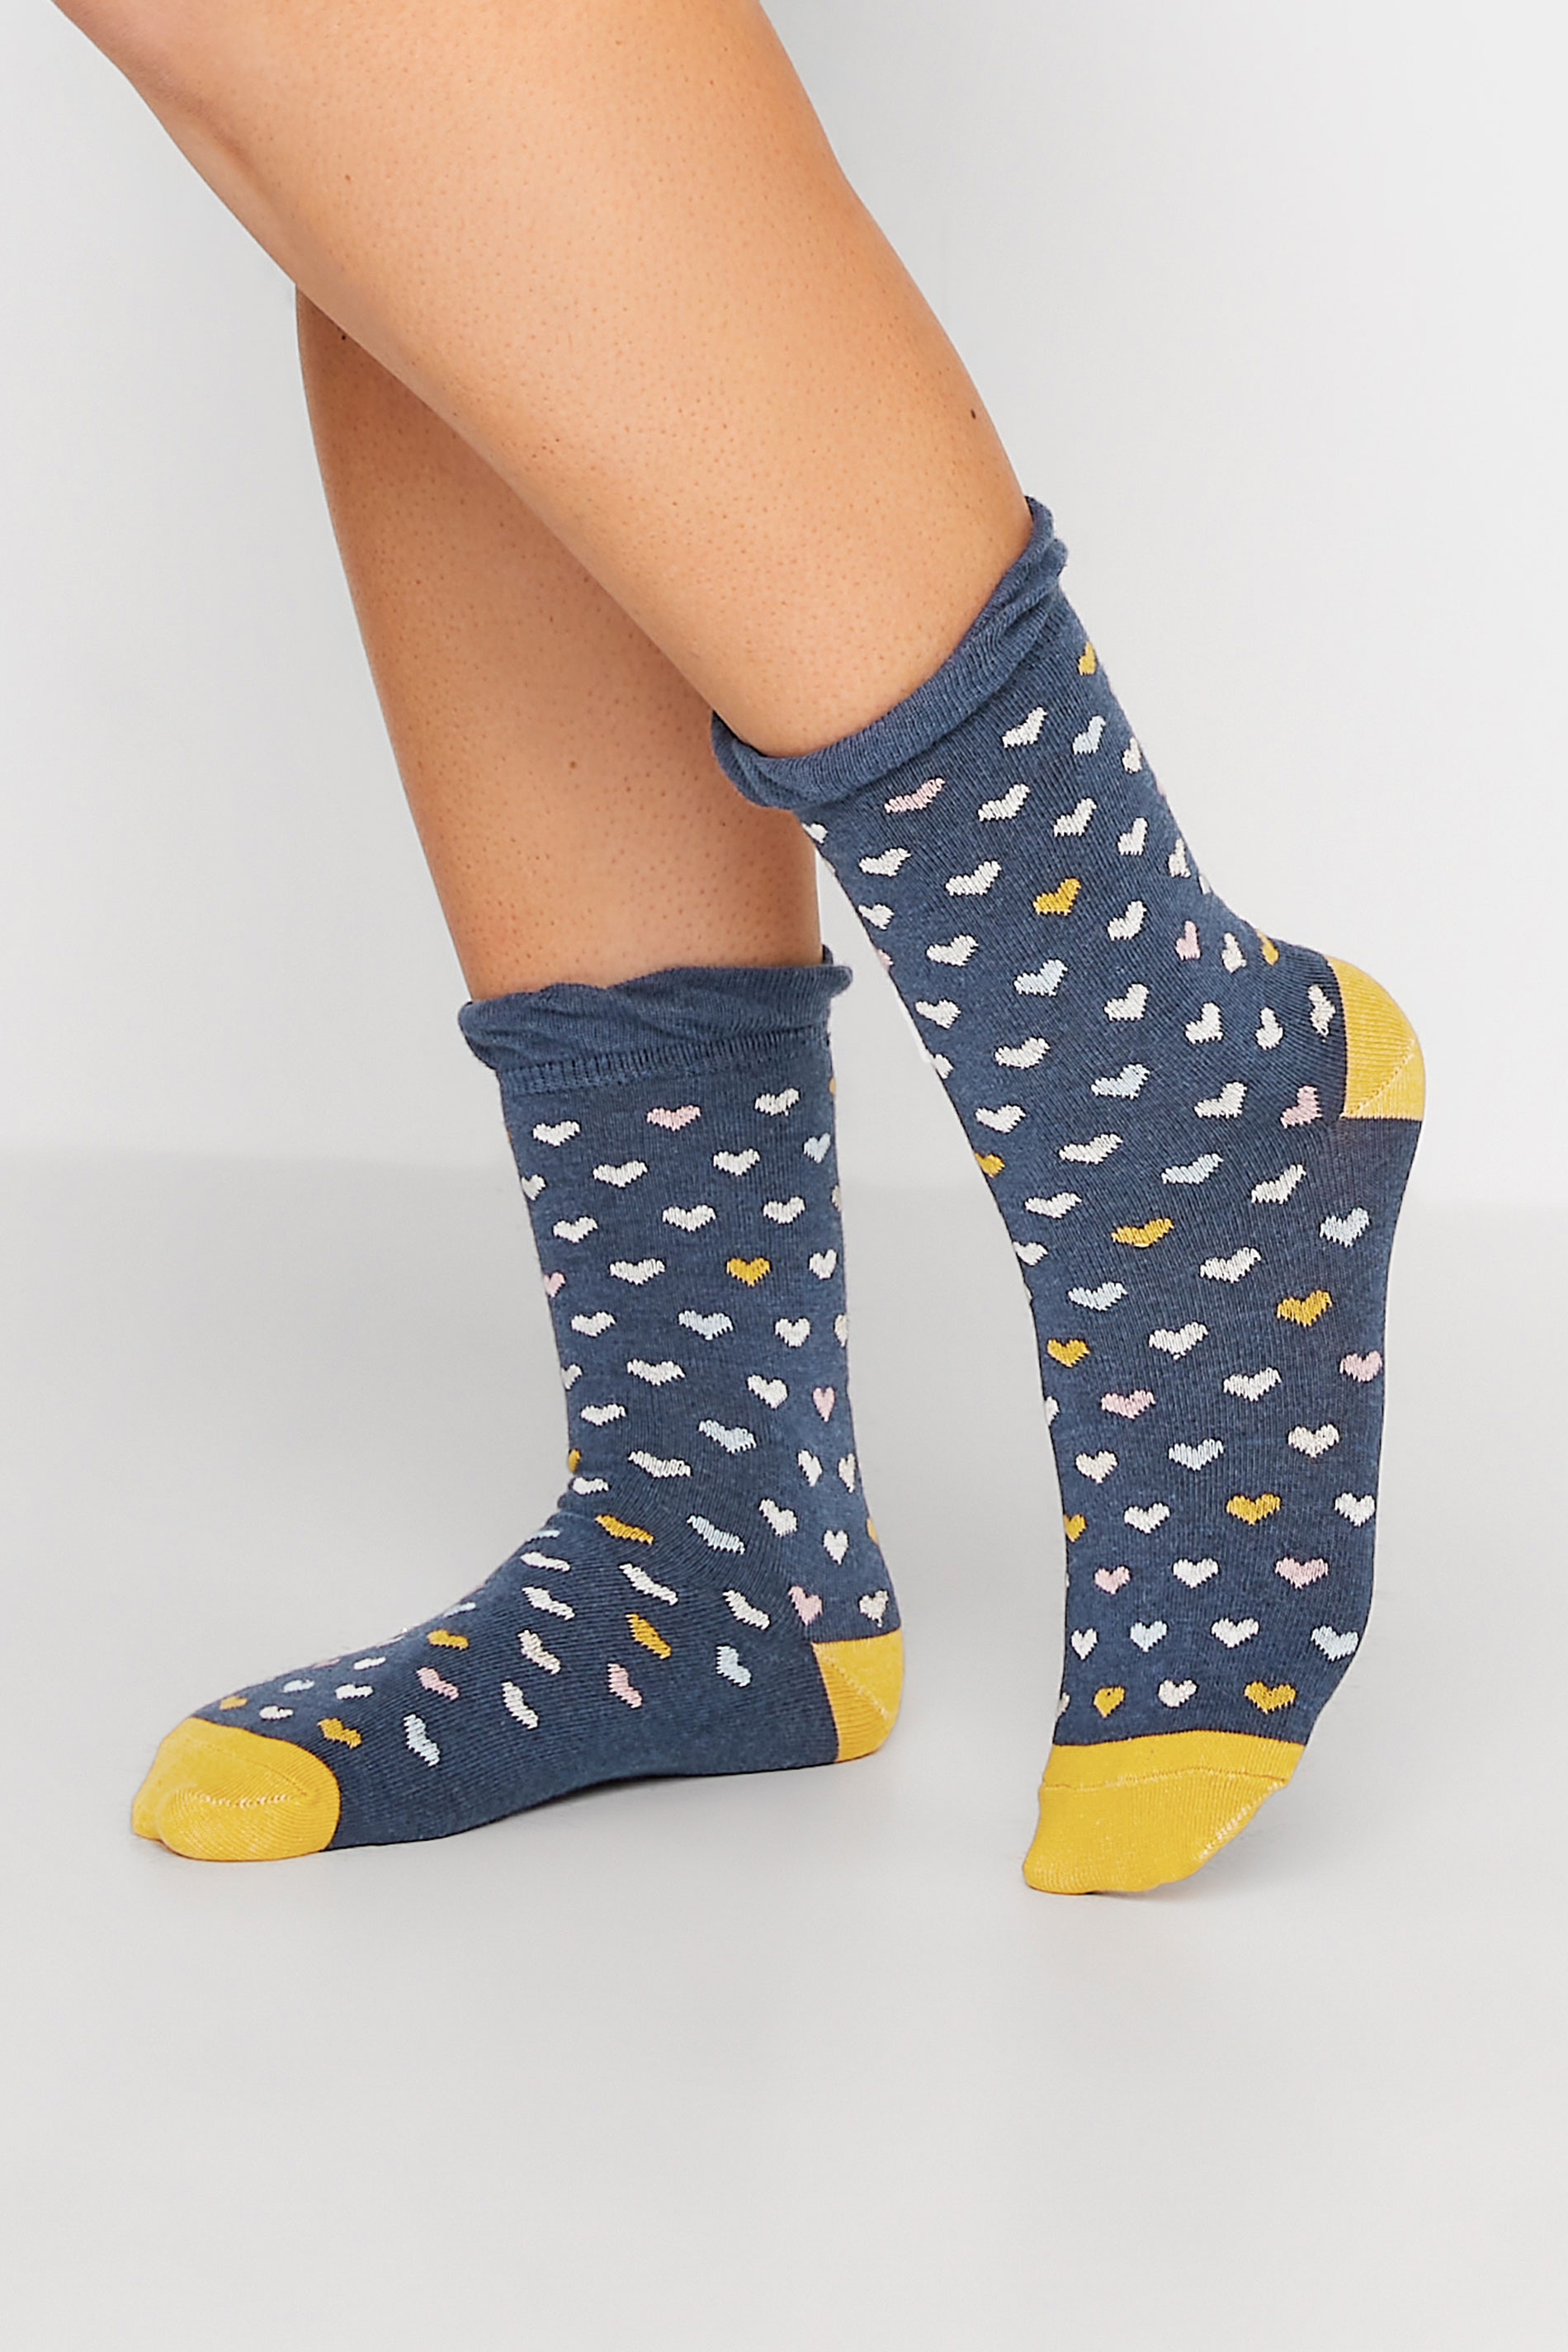 4 PACK Navy Blue Heart Print Ankle Socks | Yours Clothing 2